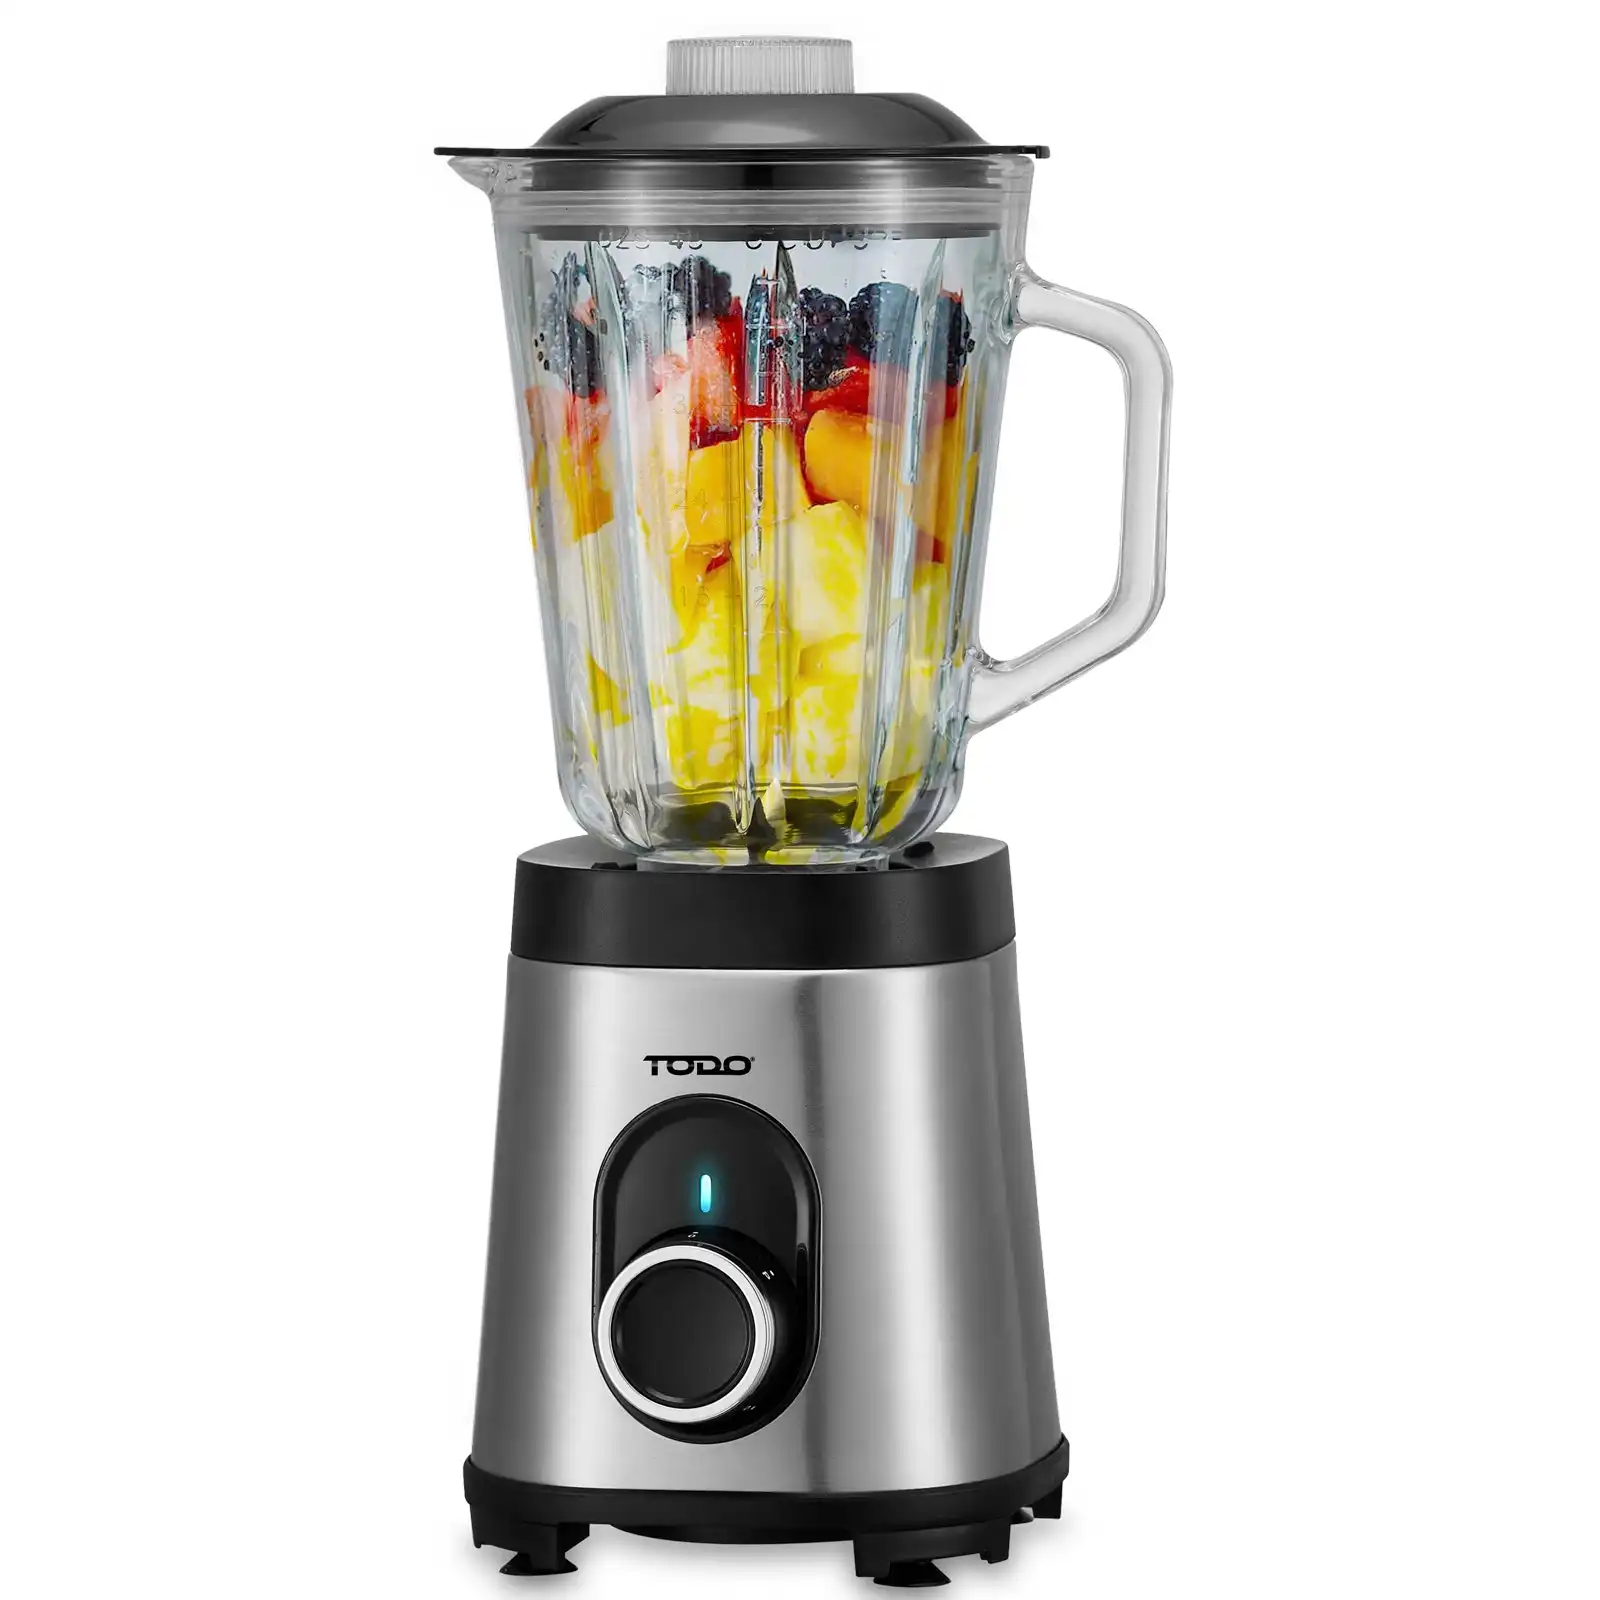 TODO 1.5L Stainless Steel Electric Blender Processor Glass Jar 550W 3 Speed LED